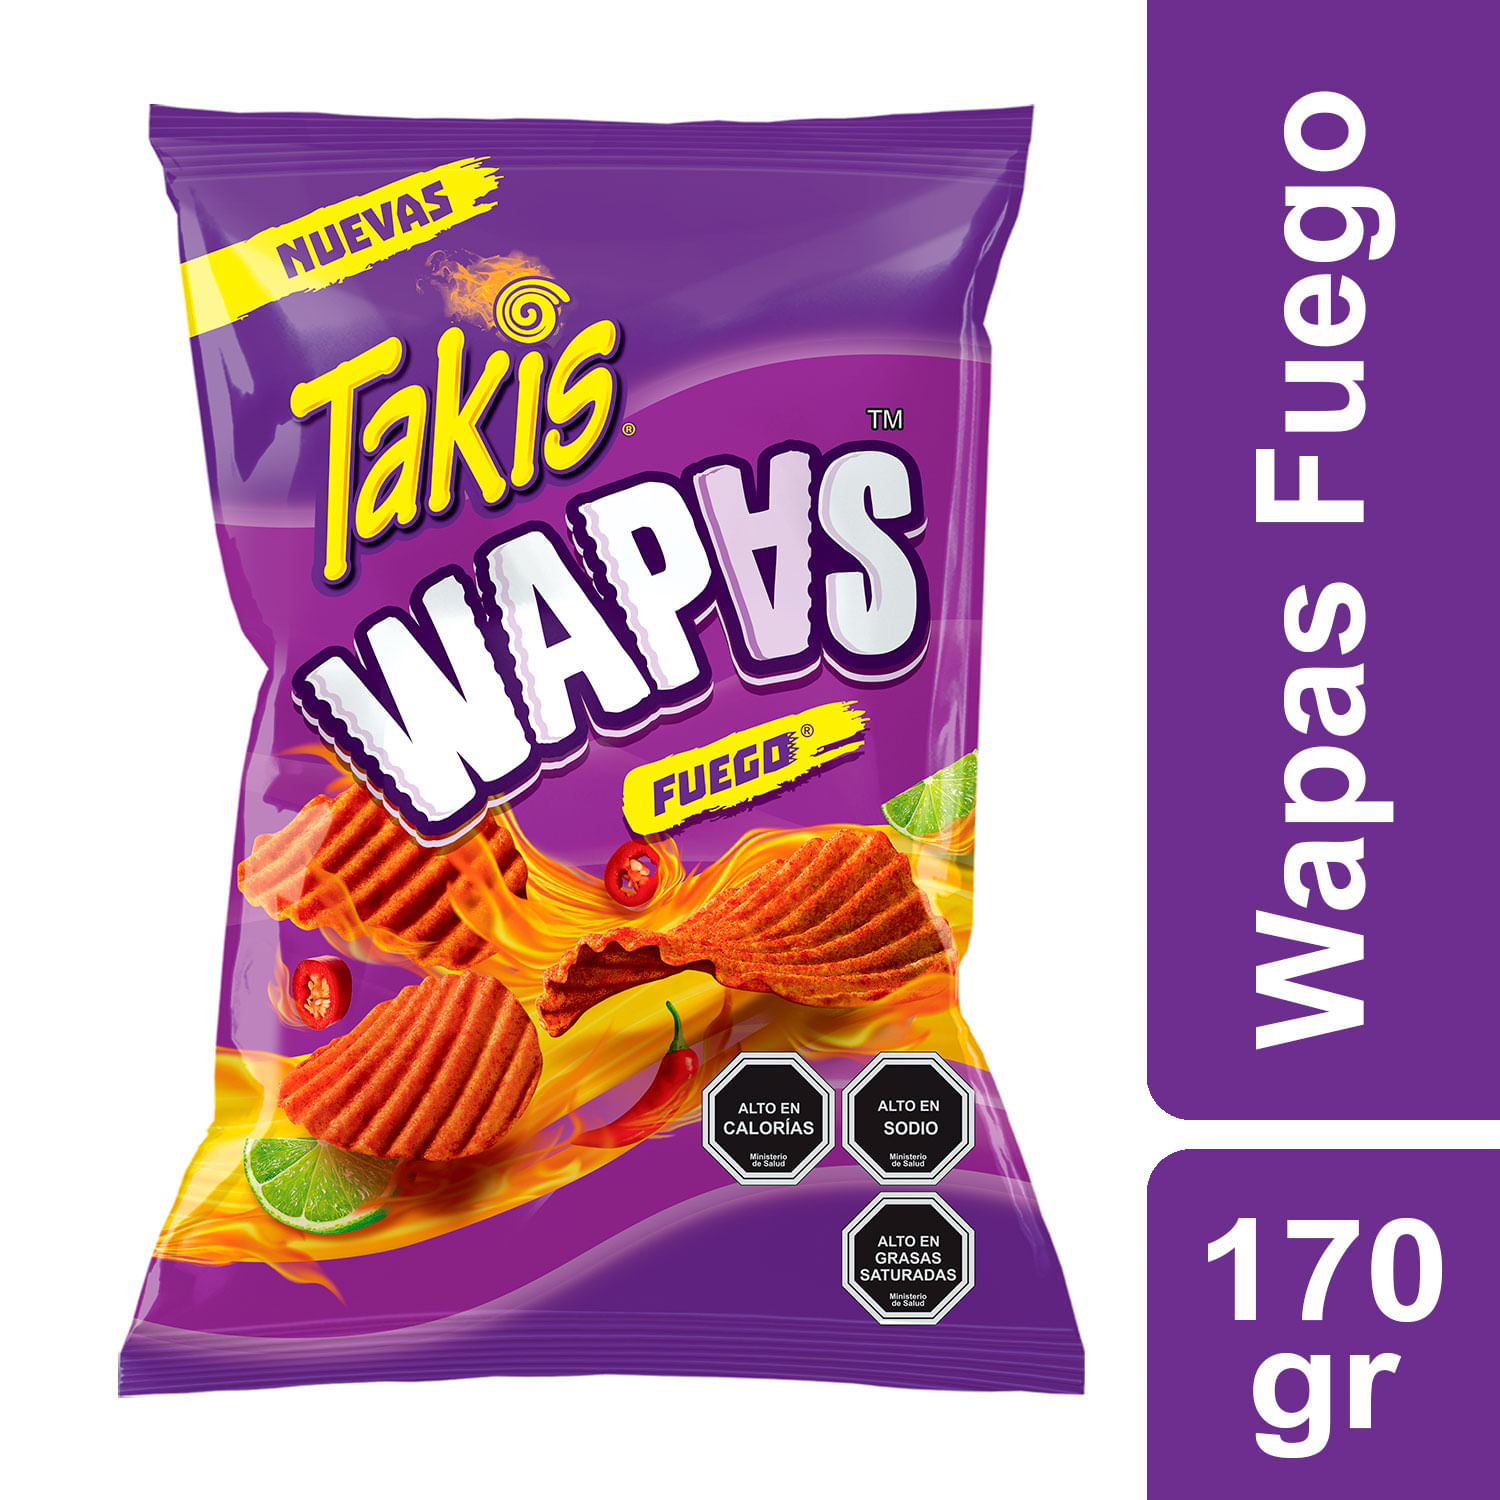 Takis Fuego Hot Chili Pepper & Lime Tortilla Chips 28gm – Choco Town